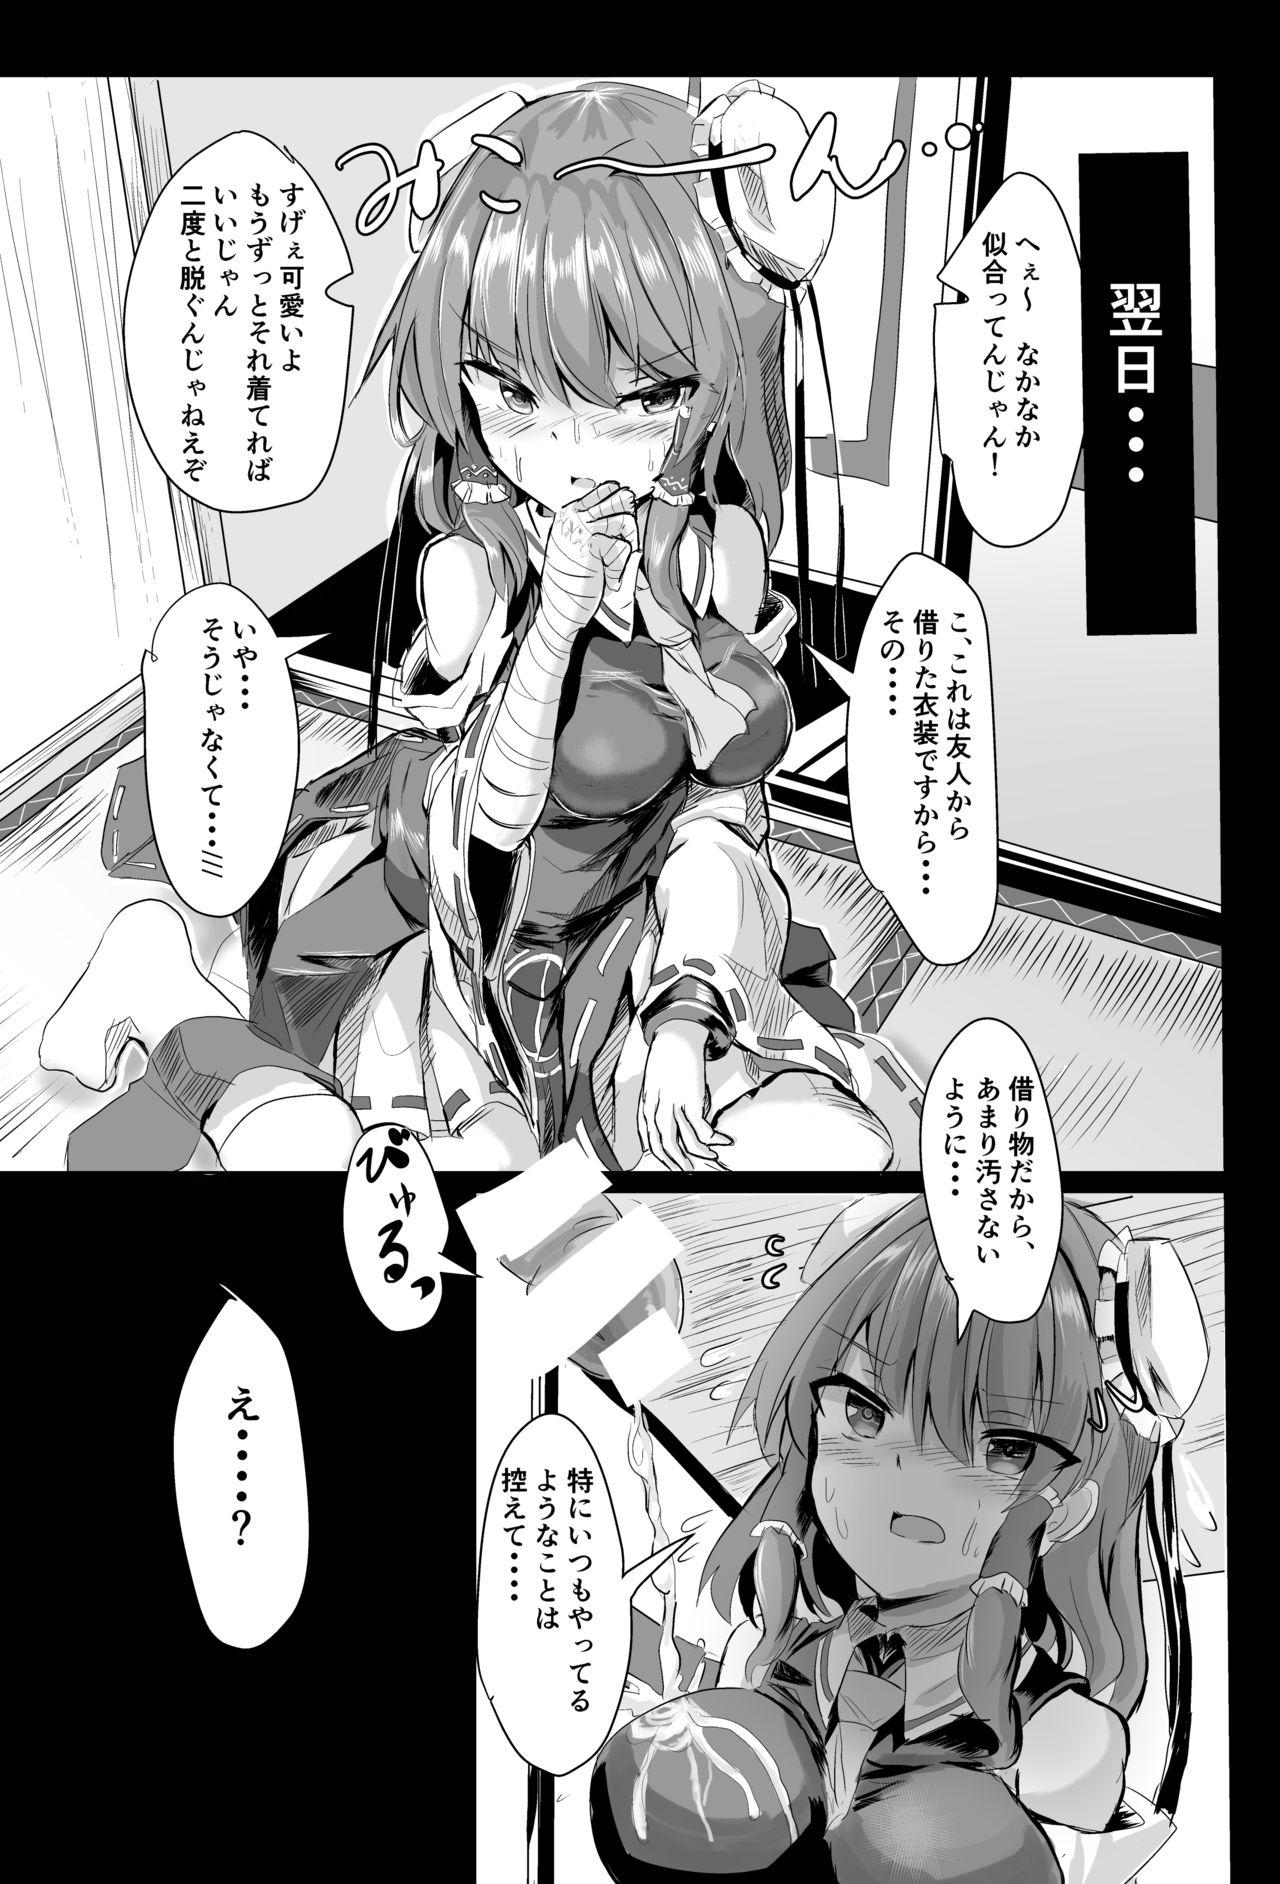 Gonzo 仙人様！押し倒すぞ！！！ - Touhou project Fucks - Page 15